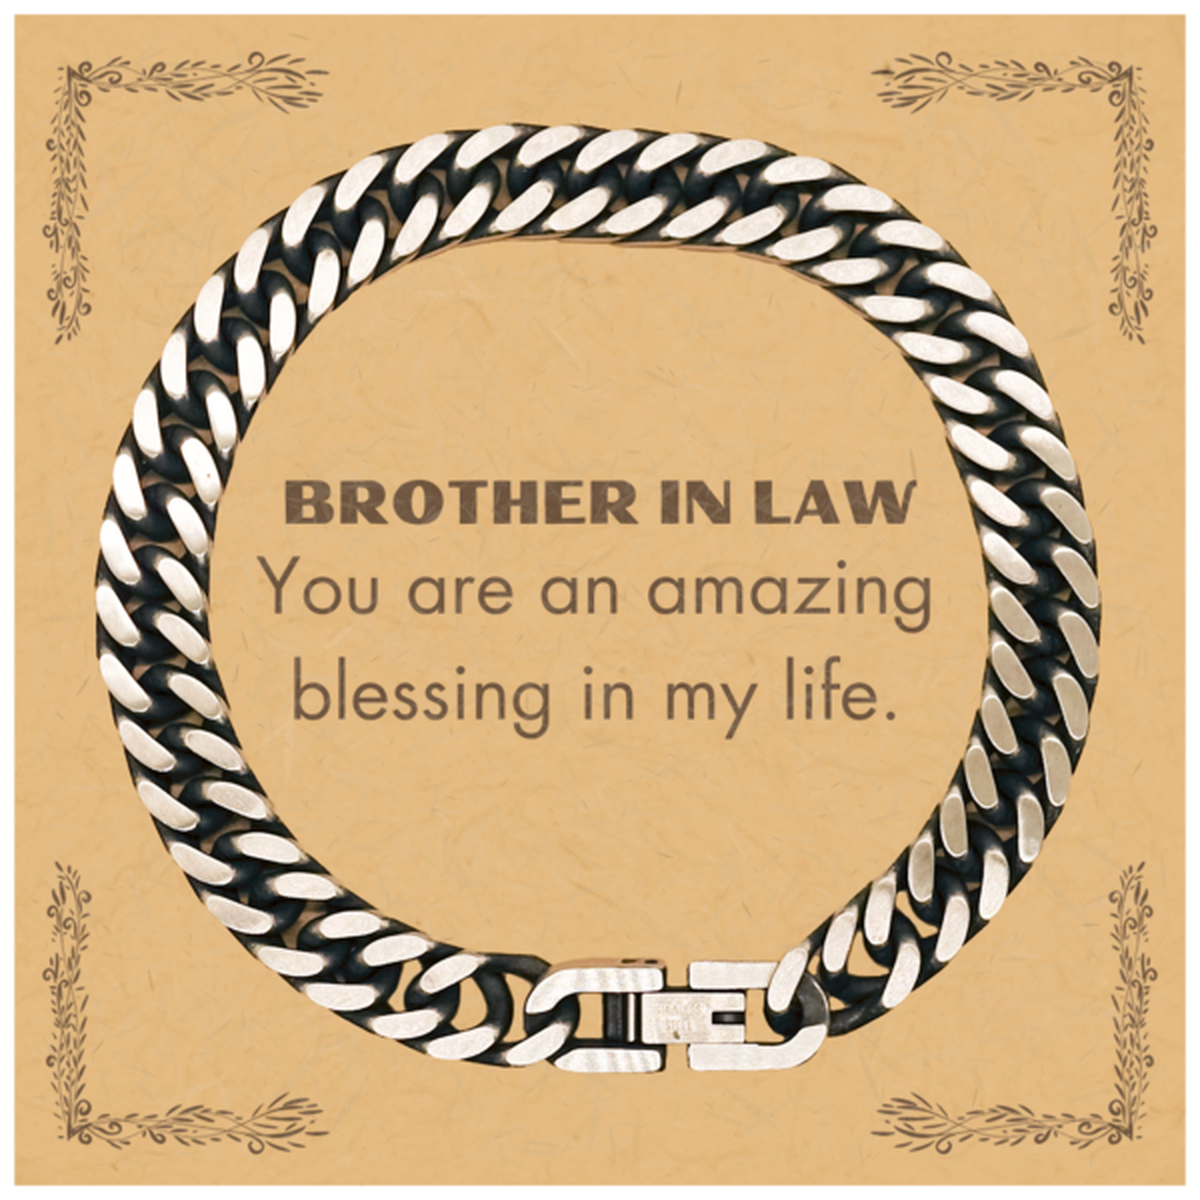 Brother In Law Cuban Link Chain Bracelet, You are an amazing blessing in my life, Thank You Gifts For Brother In Law, Inspirational Birthday Christmas Unique Gifts For Brother In Law